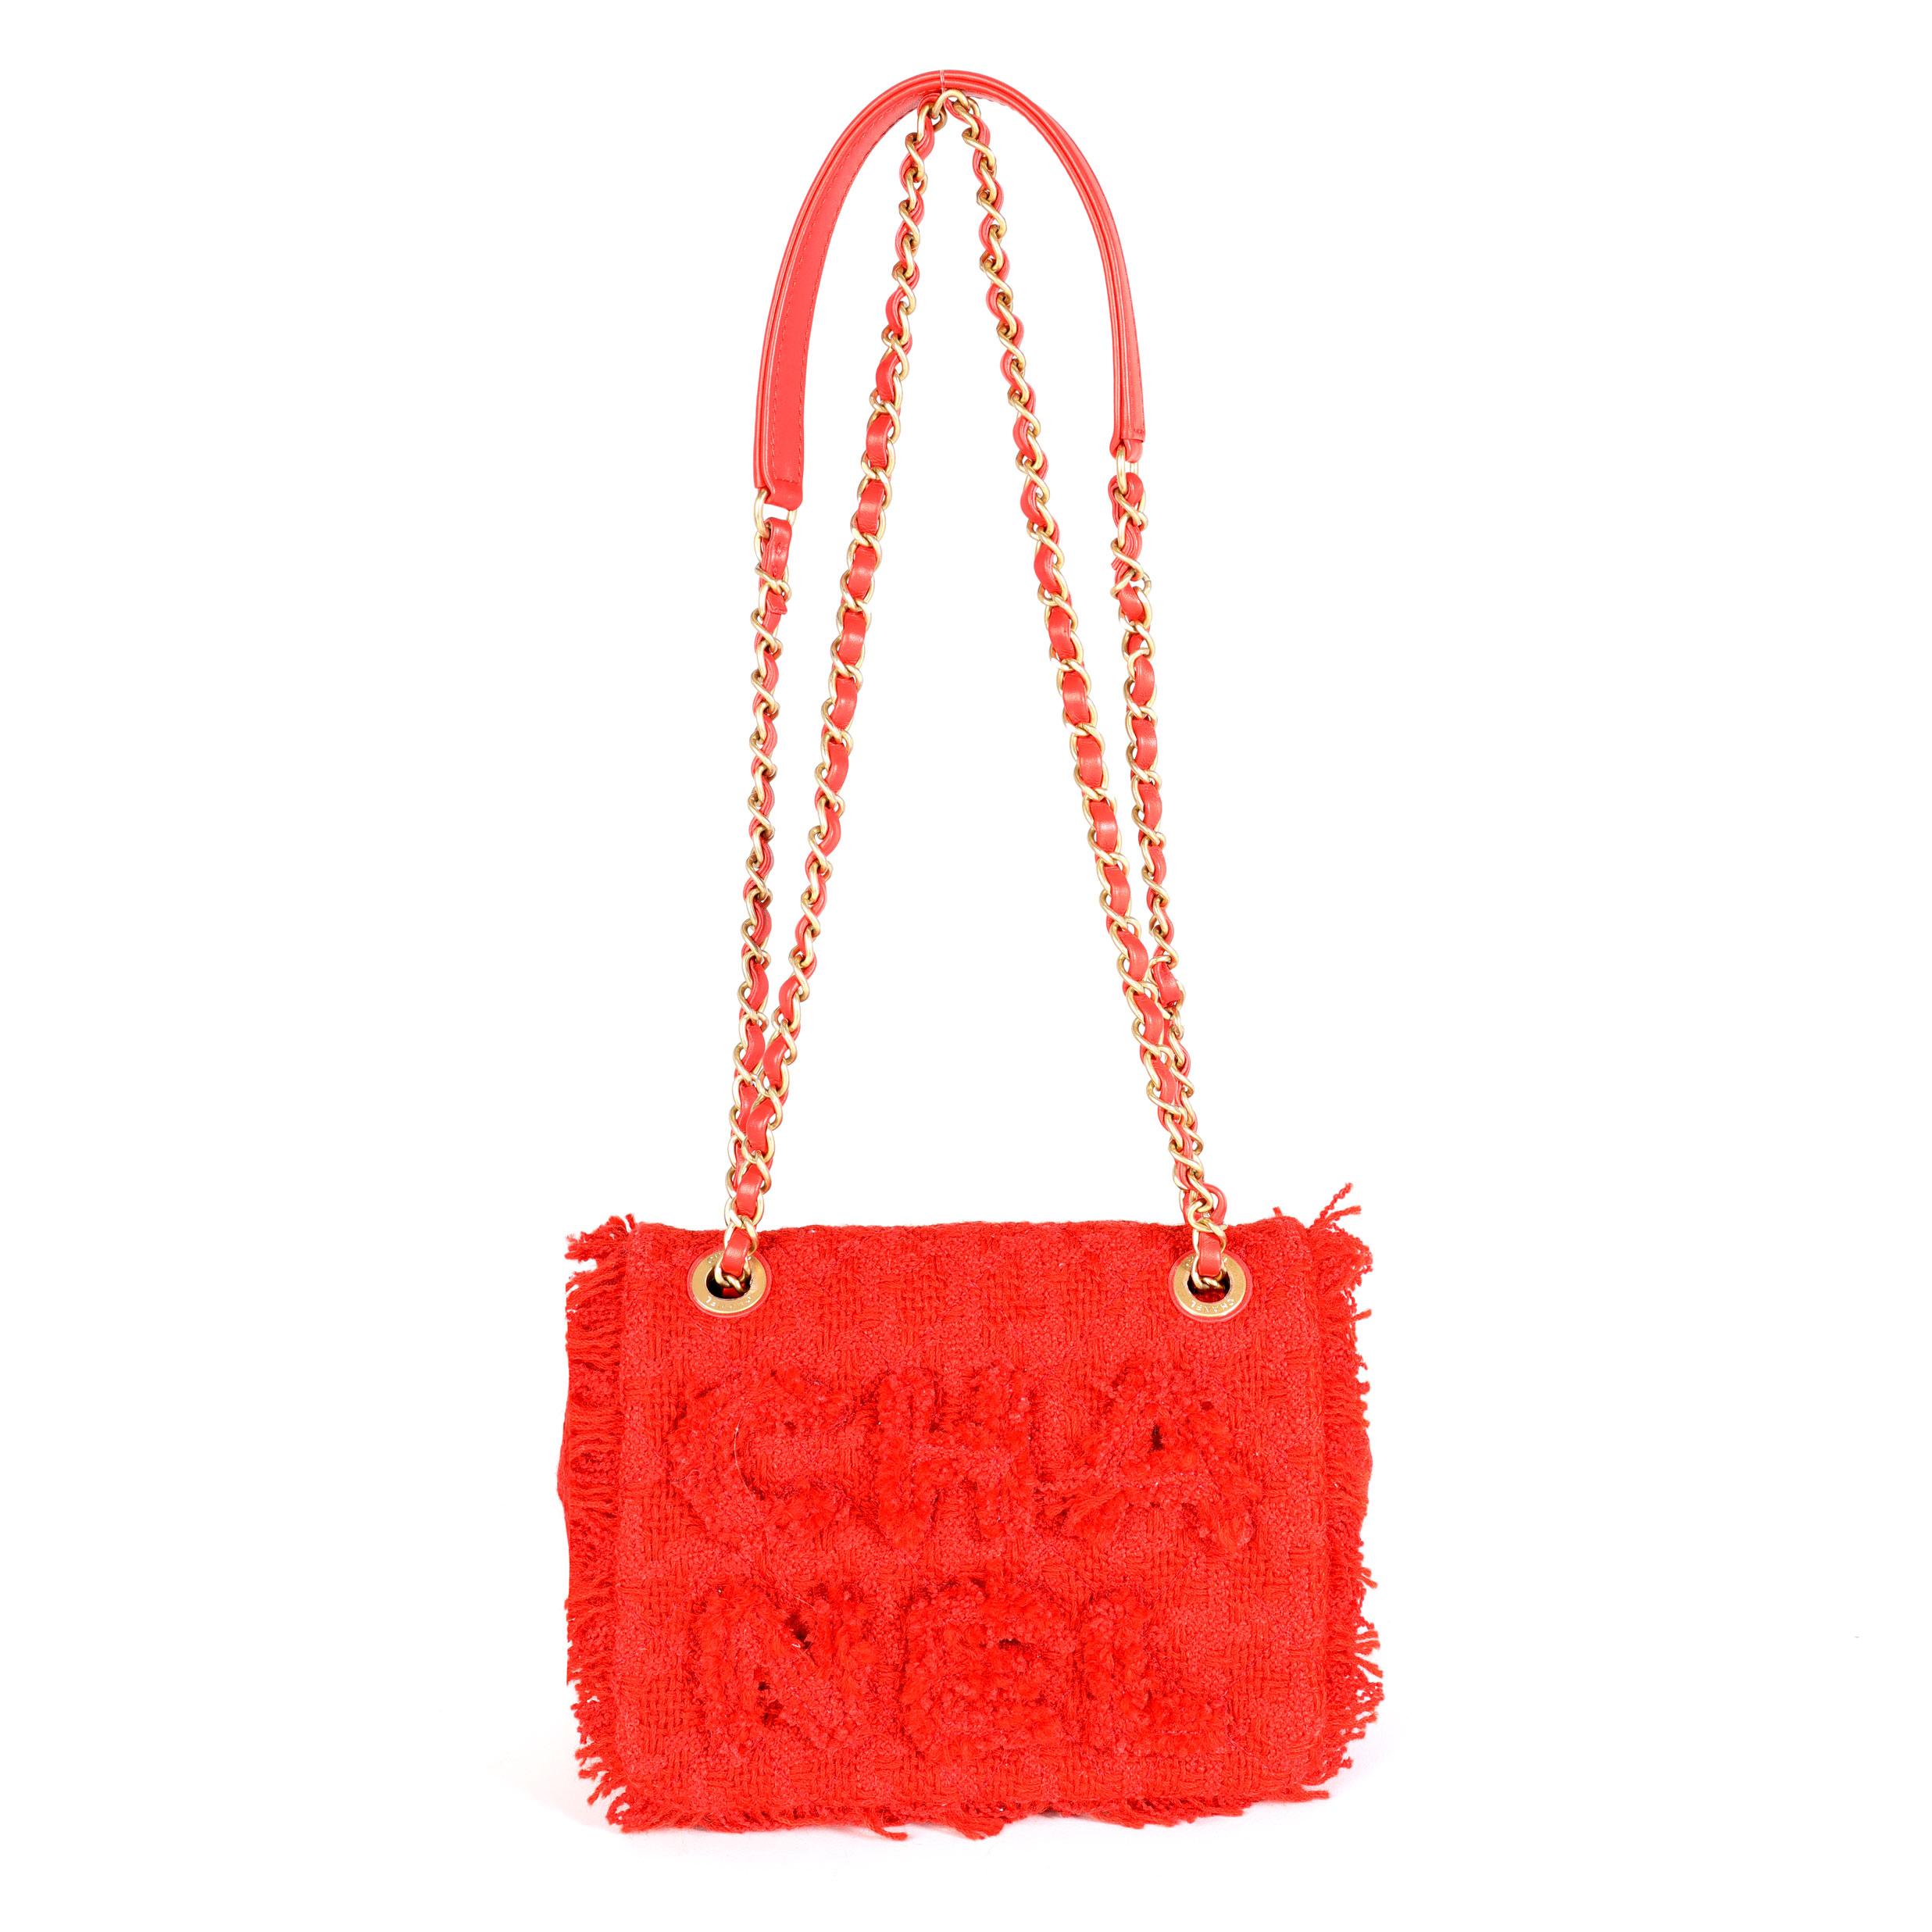 Listing Title: Chanel Red Frayed Tweed 'Chanel' Flap Bag
SKU: 114503

Handbag Condition: Excellent
Condition Comments: Excellent Condition. Plastic on some hardware. Scratching to hardware. No other visible signs of wear.
Brand: Chanel
Model: Tweed